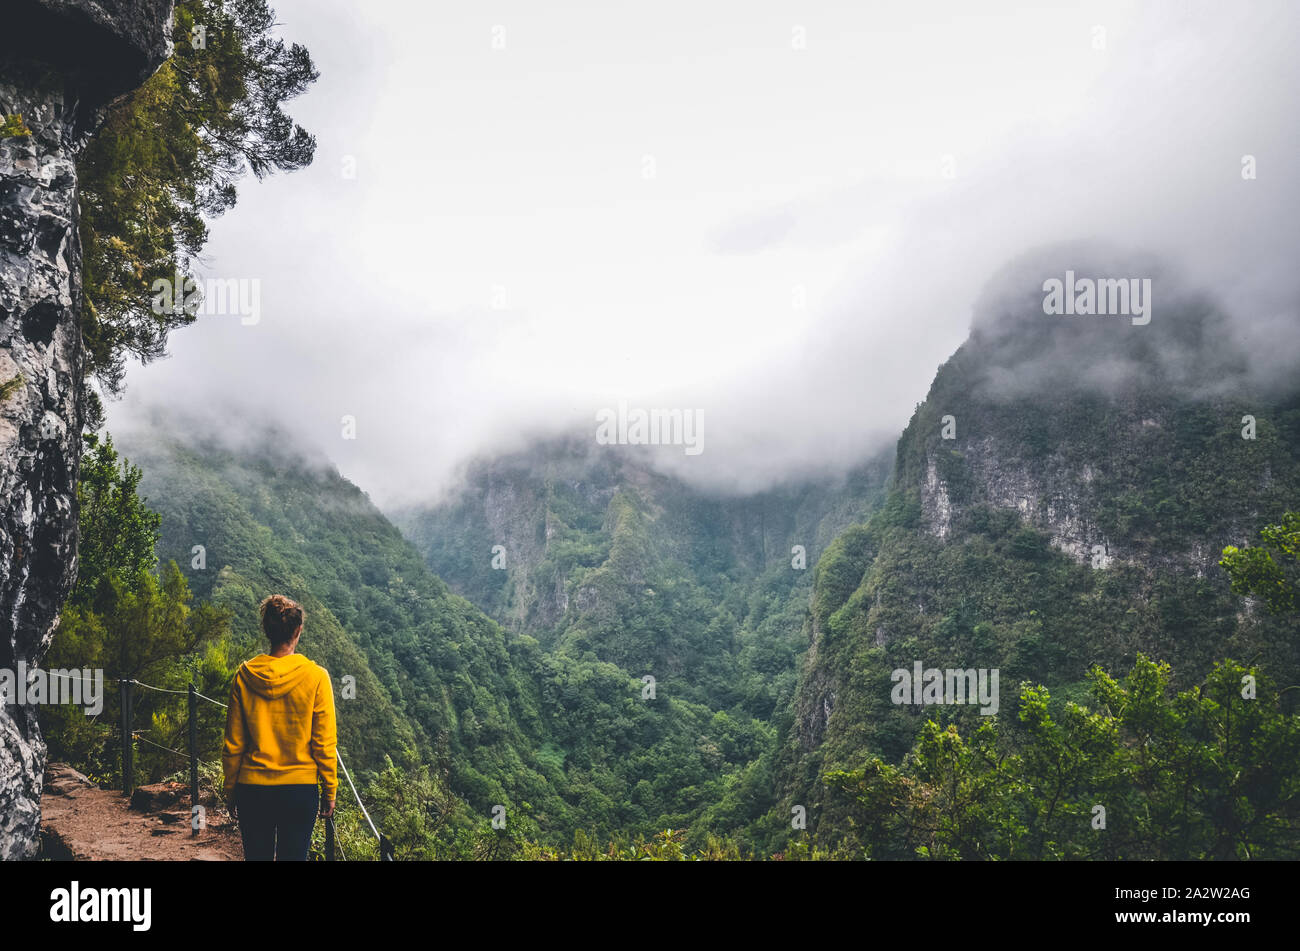 Young woman in yellow sweatshirt on a viewpoint in Levada Caldeirao Verde, Madeira, Portugal. Green scenic mountains in fog, misty landscape. Female traveler. Instagram, hipster filter. Stock Photo